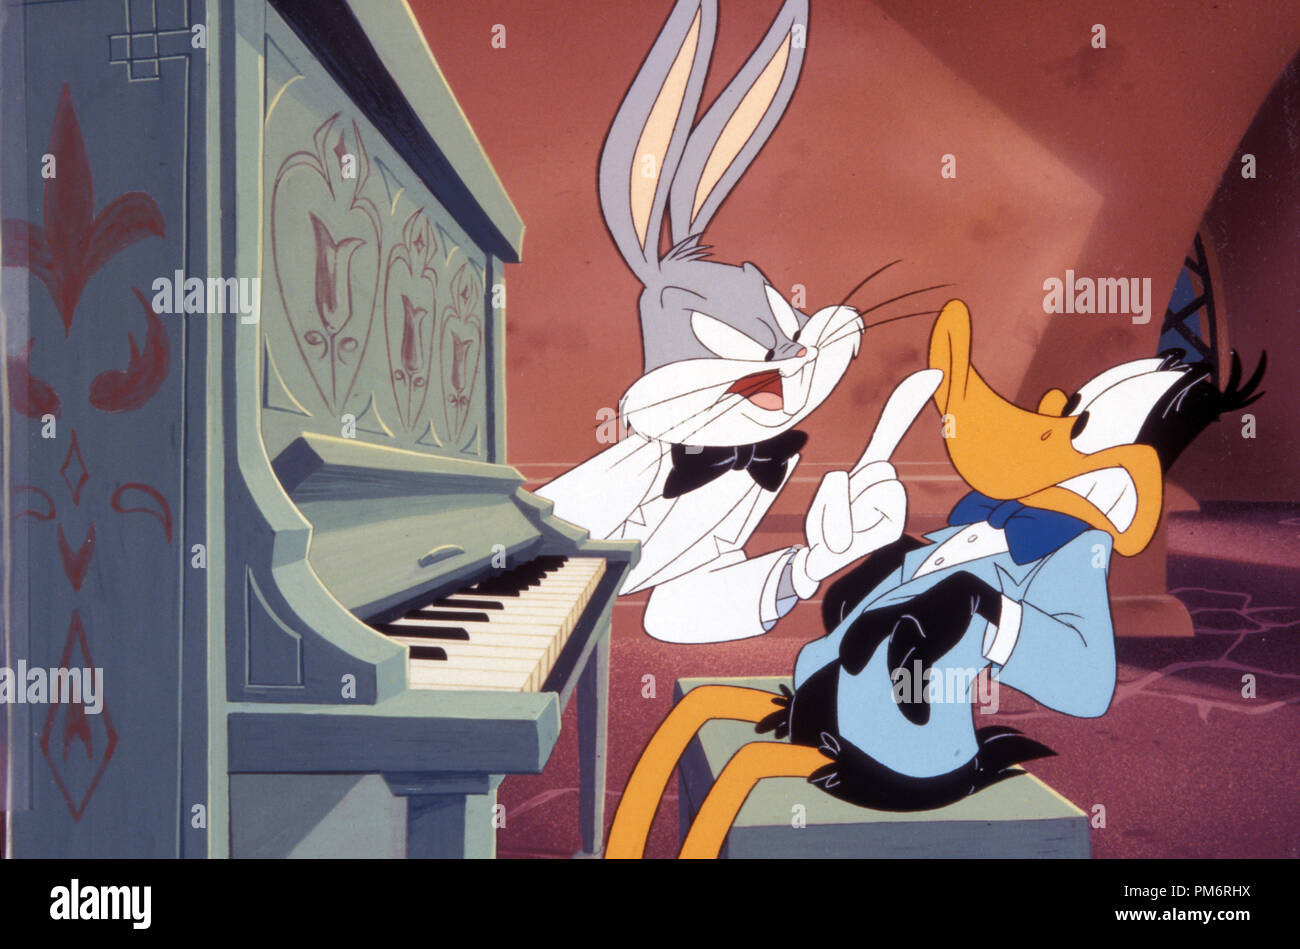 Film Still from 'Carrotblanca' Bugs Bunny, Daffy Duck © 1995 Warner Brothers   File Reference # 31043578THA  For Editorial Use Only - All Rights Reserved Stock Photo